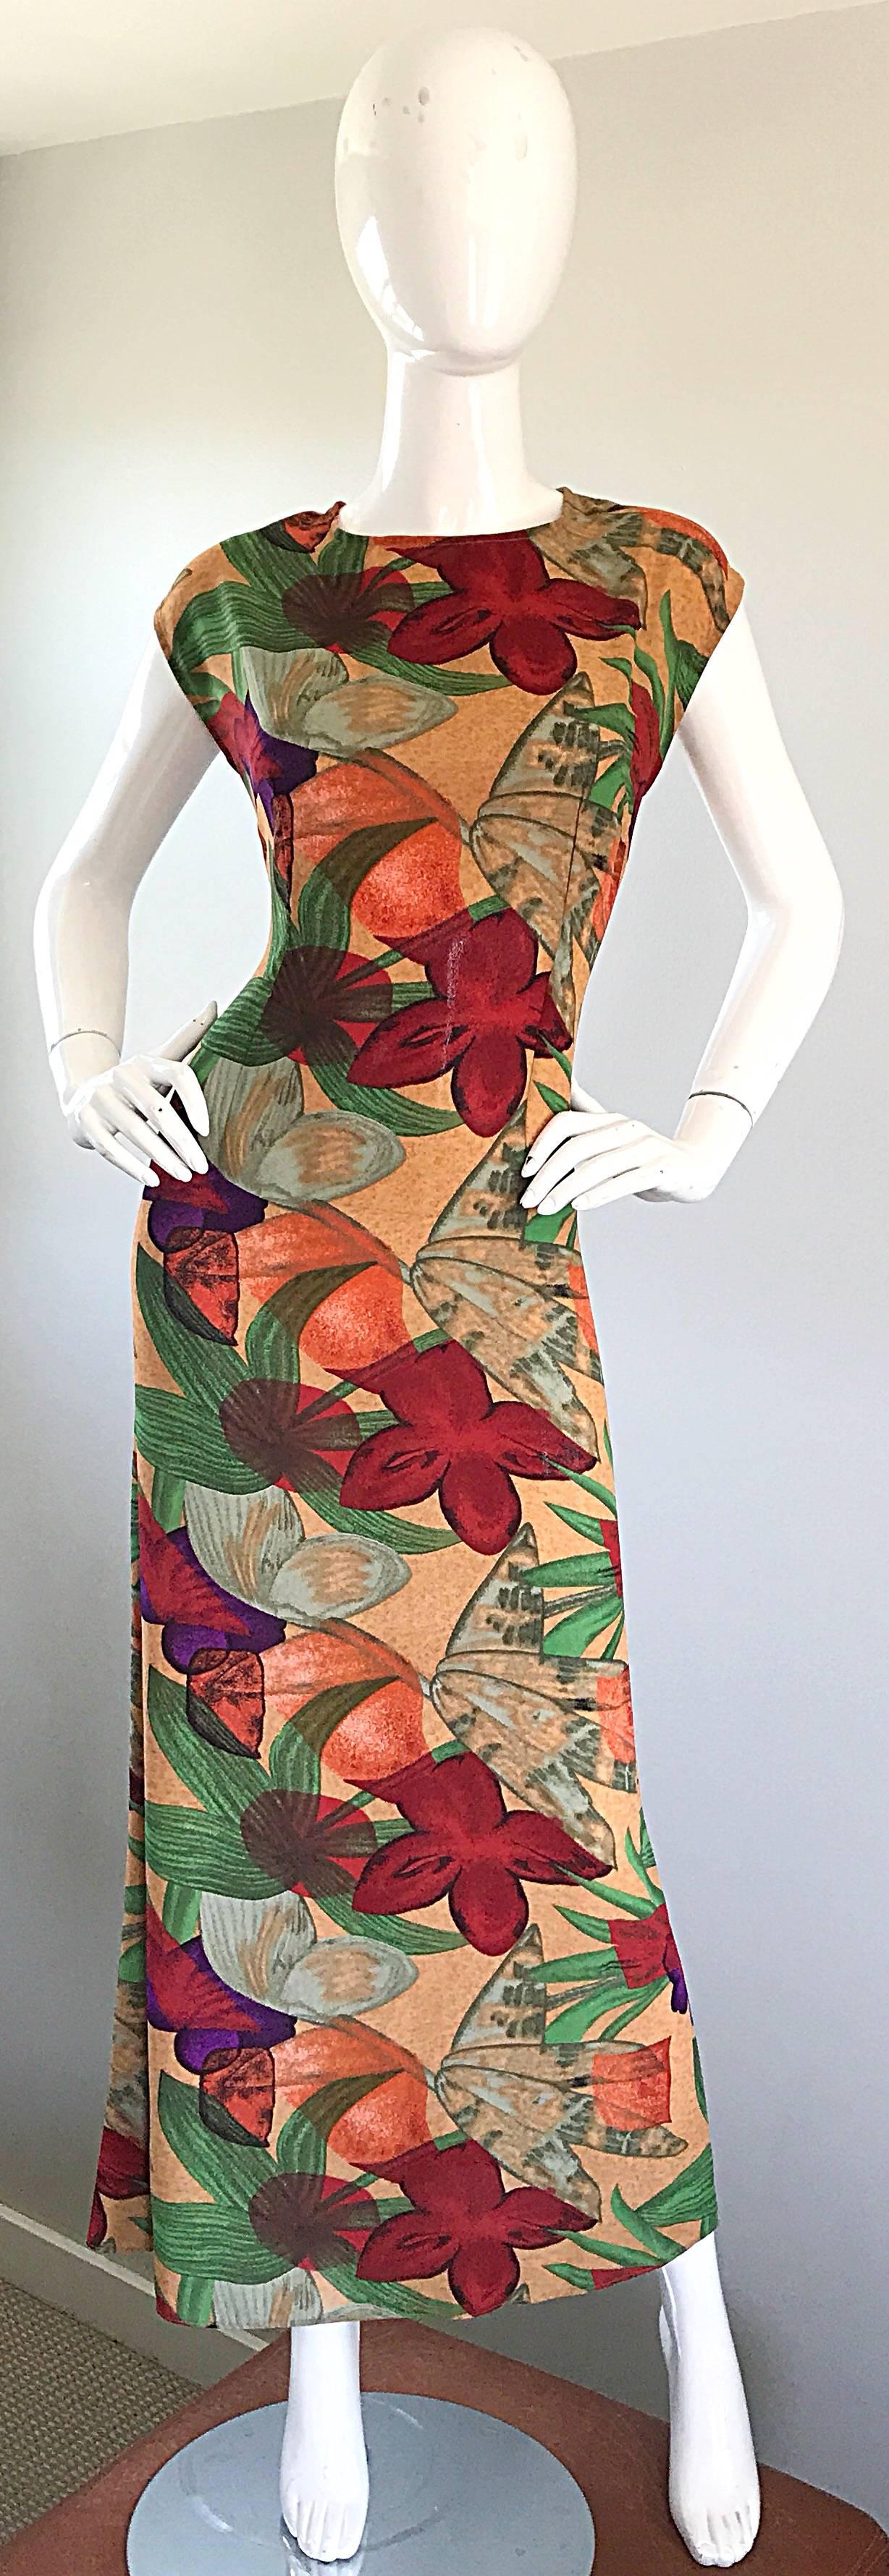 Gorgeous (brand new with original store tags) vintage HALSTON vibrant colored Hawaiian / Tropical print maxi dress! Features a terracotta backdrop with brightly colored abstract flowers in purple, red, orange, sorbet, green, and tan throughout.